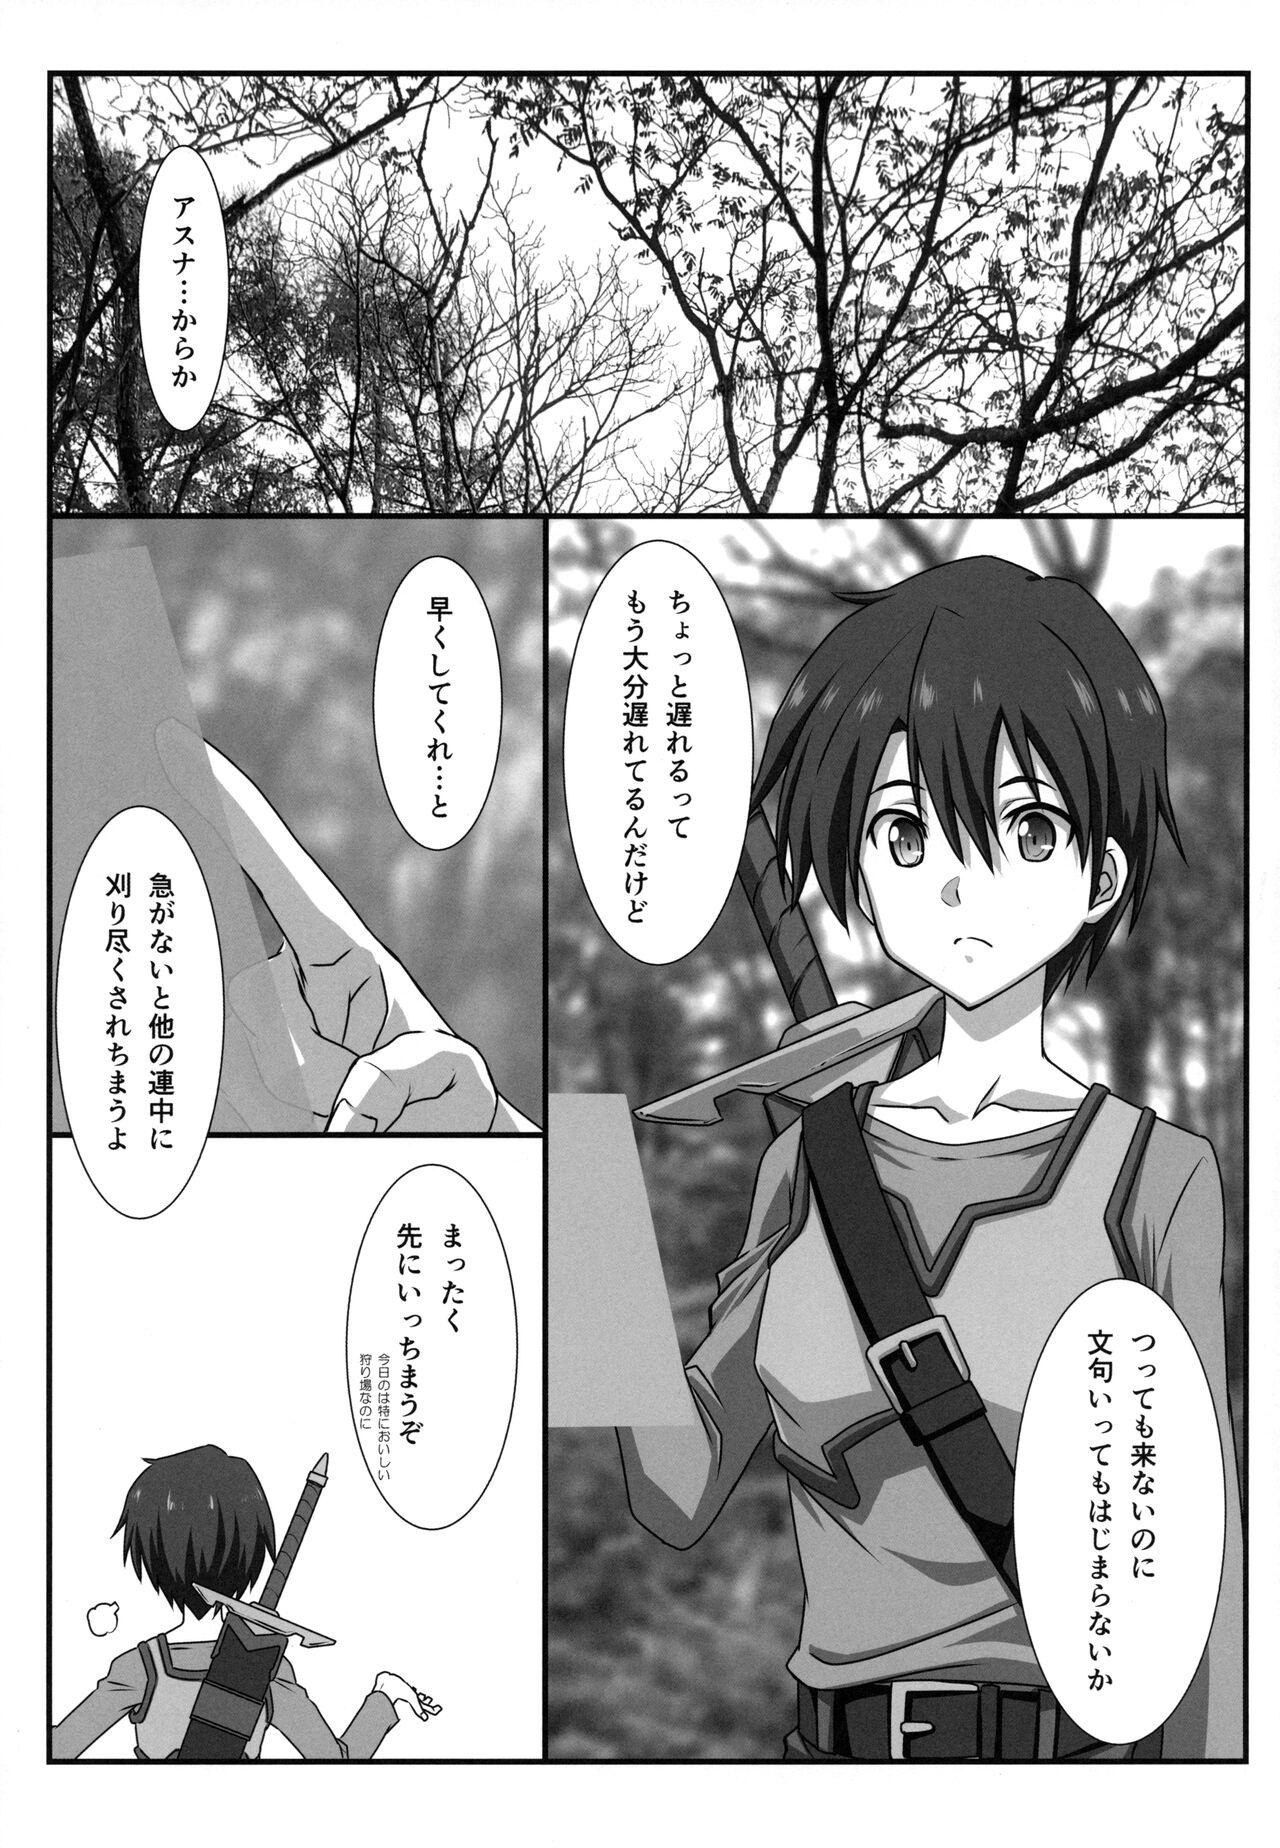 Alt Astral Bout Ver. 47 - Sword art online Guyonshemale - Page 4